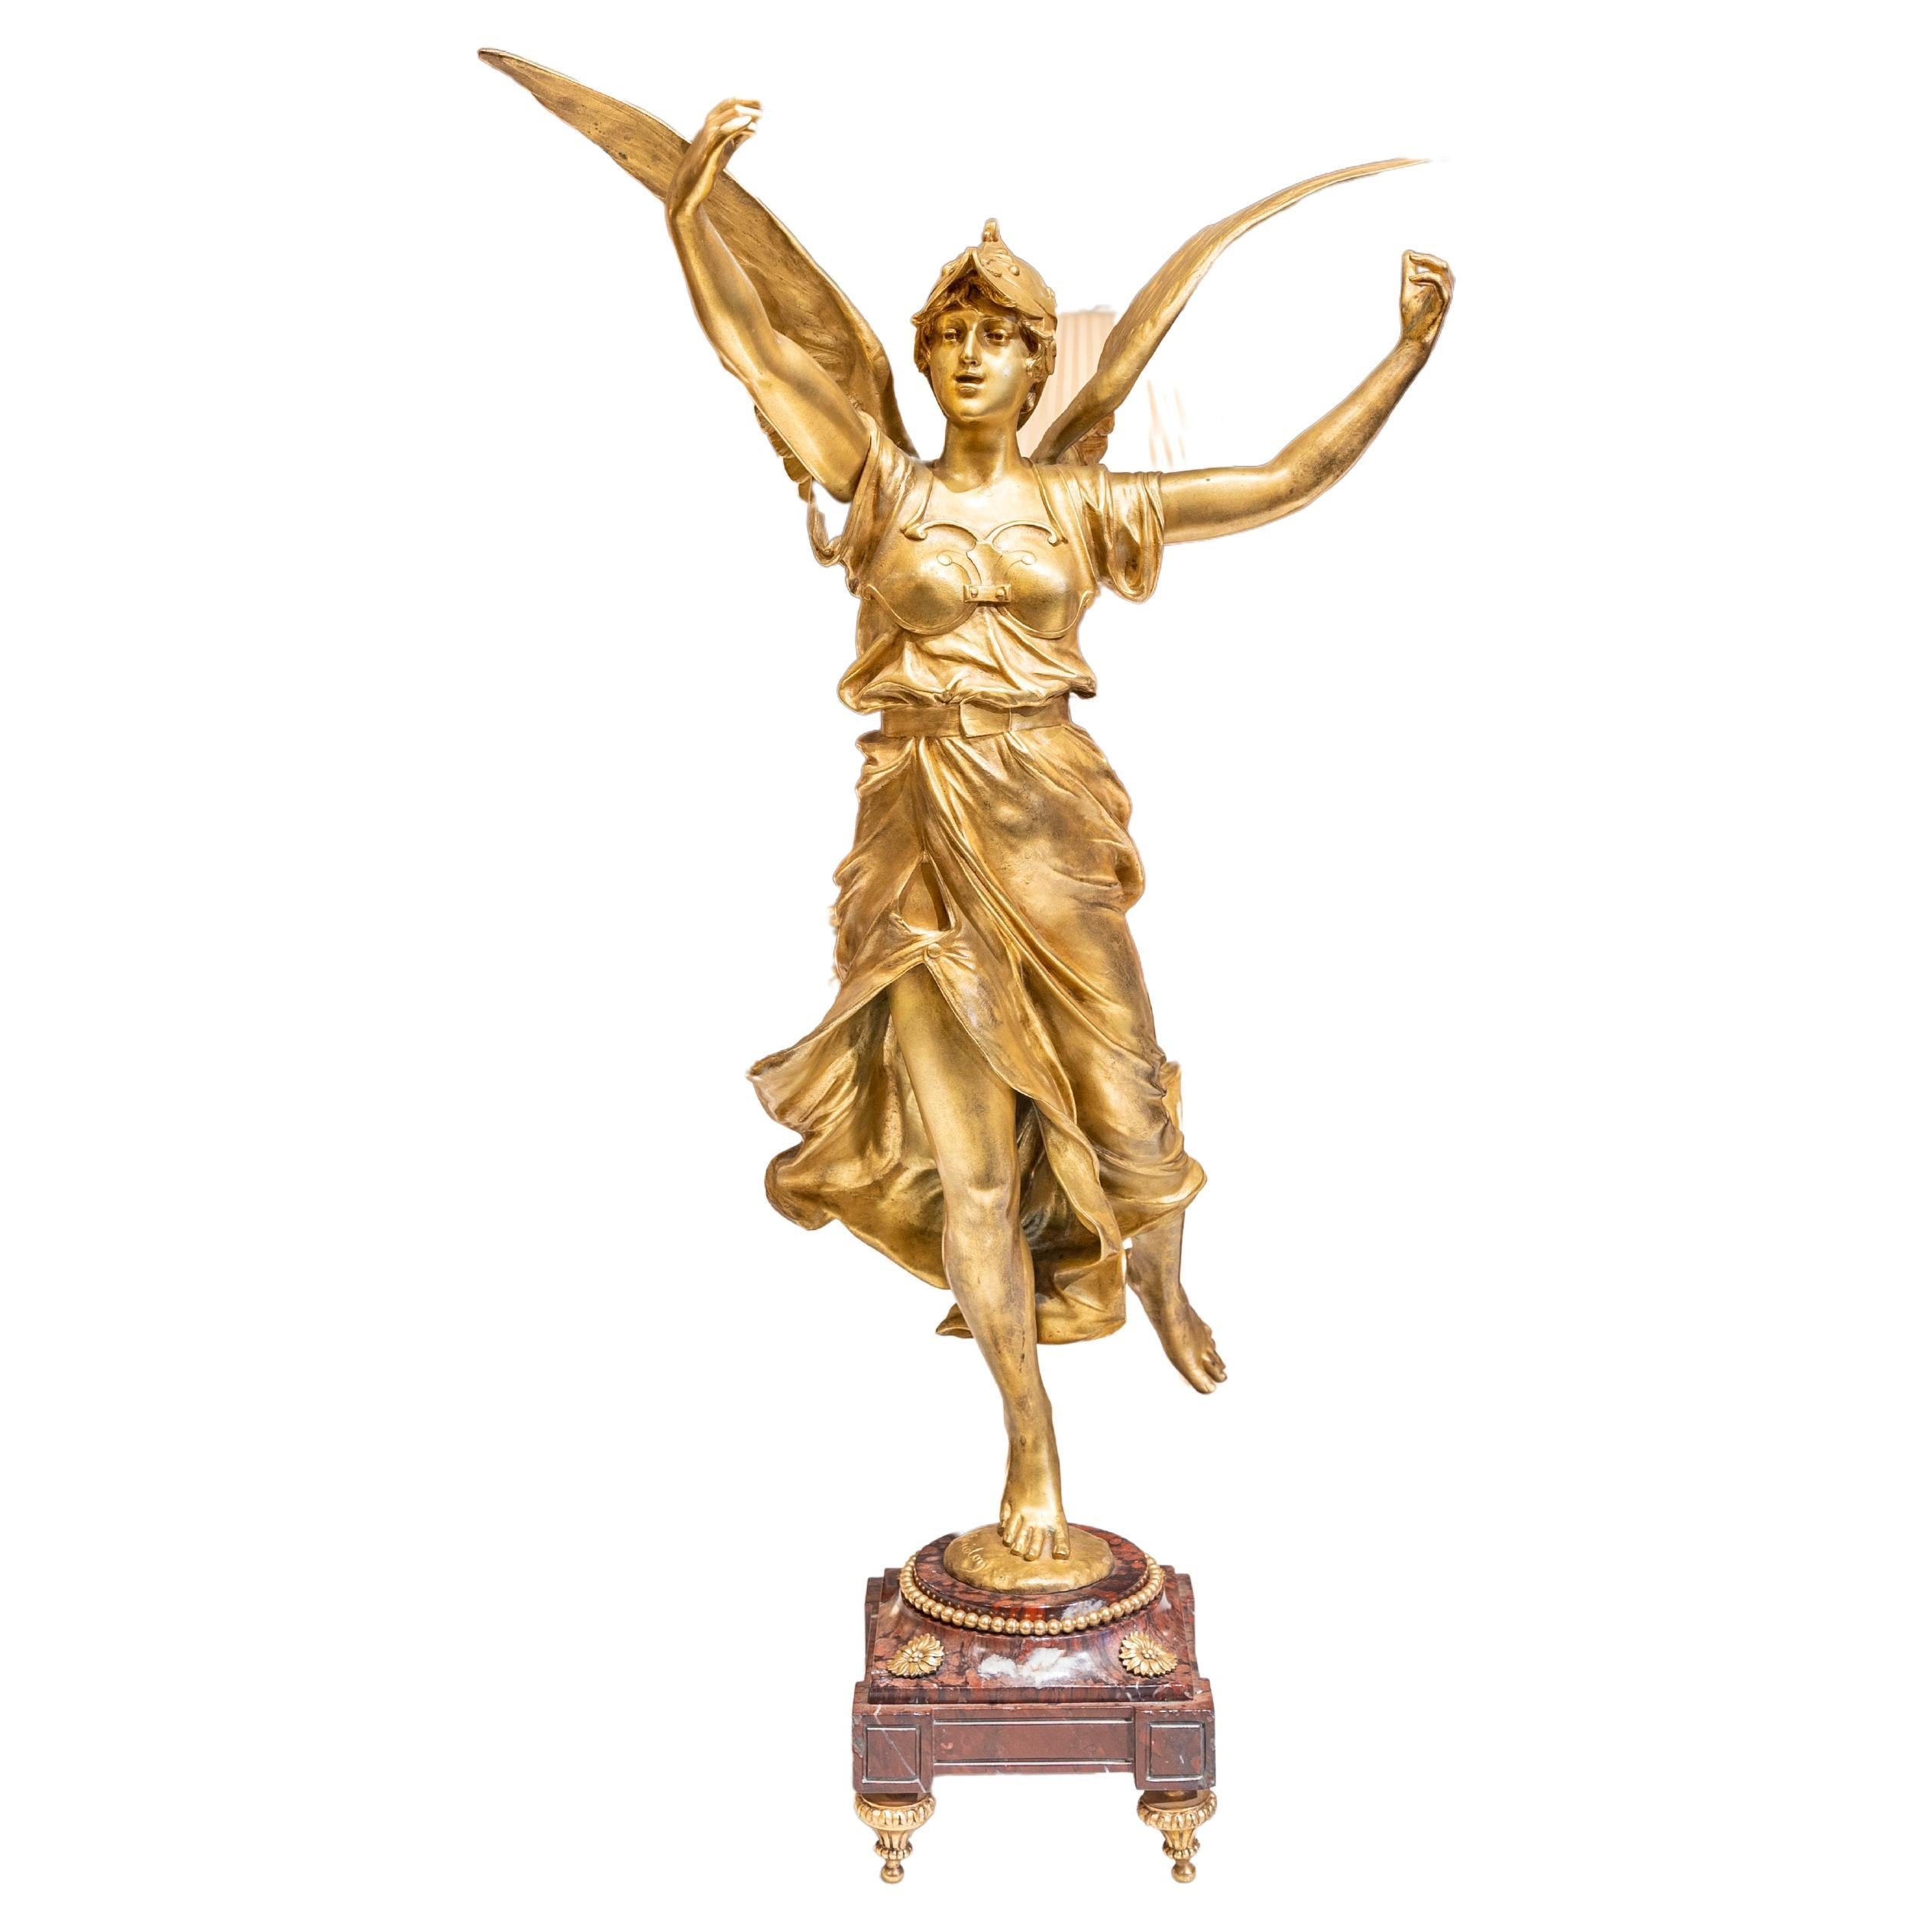 Fantastic Large 19th C Gilt Bronze Winged Mercury on a Marble and Gilt Base